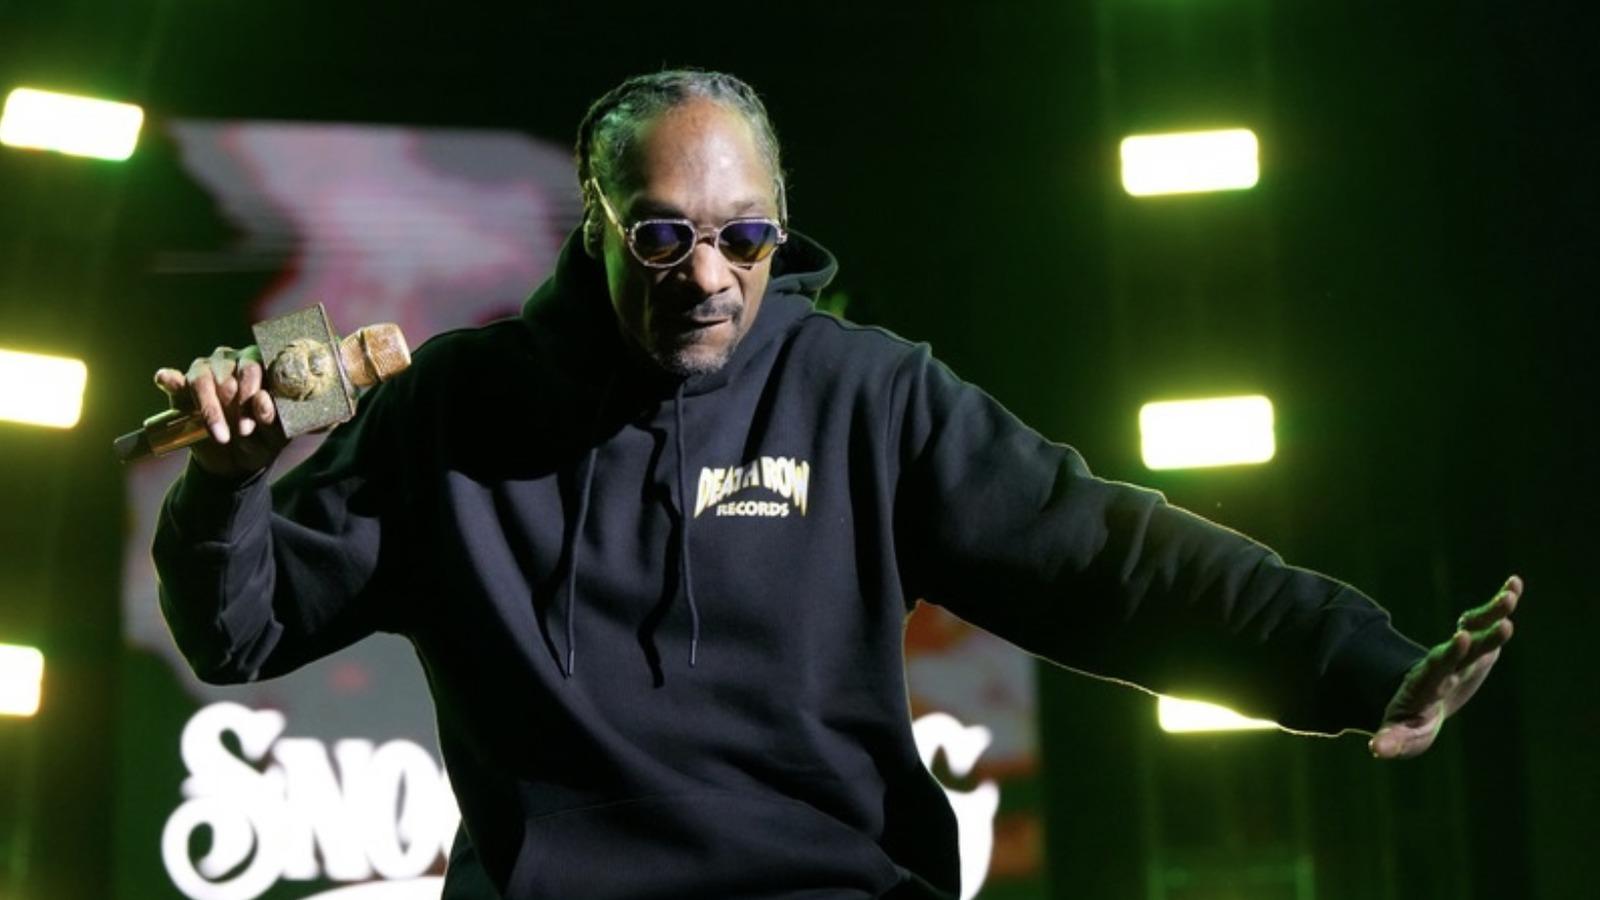 Snoop Dogg’s hilarious commentary stole the show at Wrestlemania 40